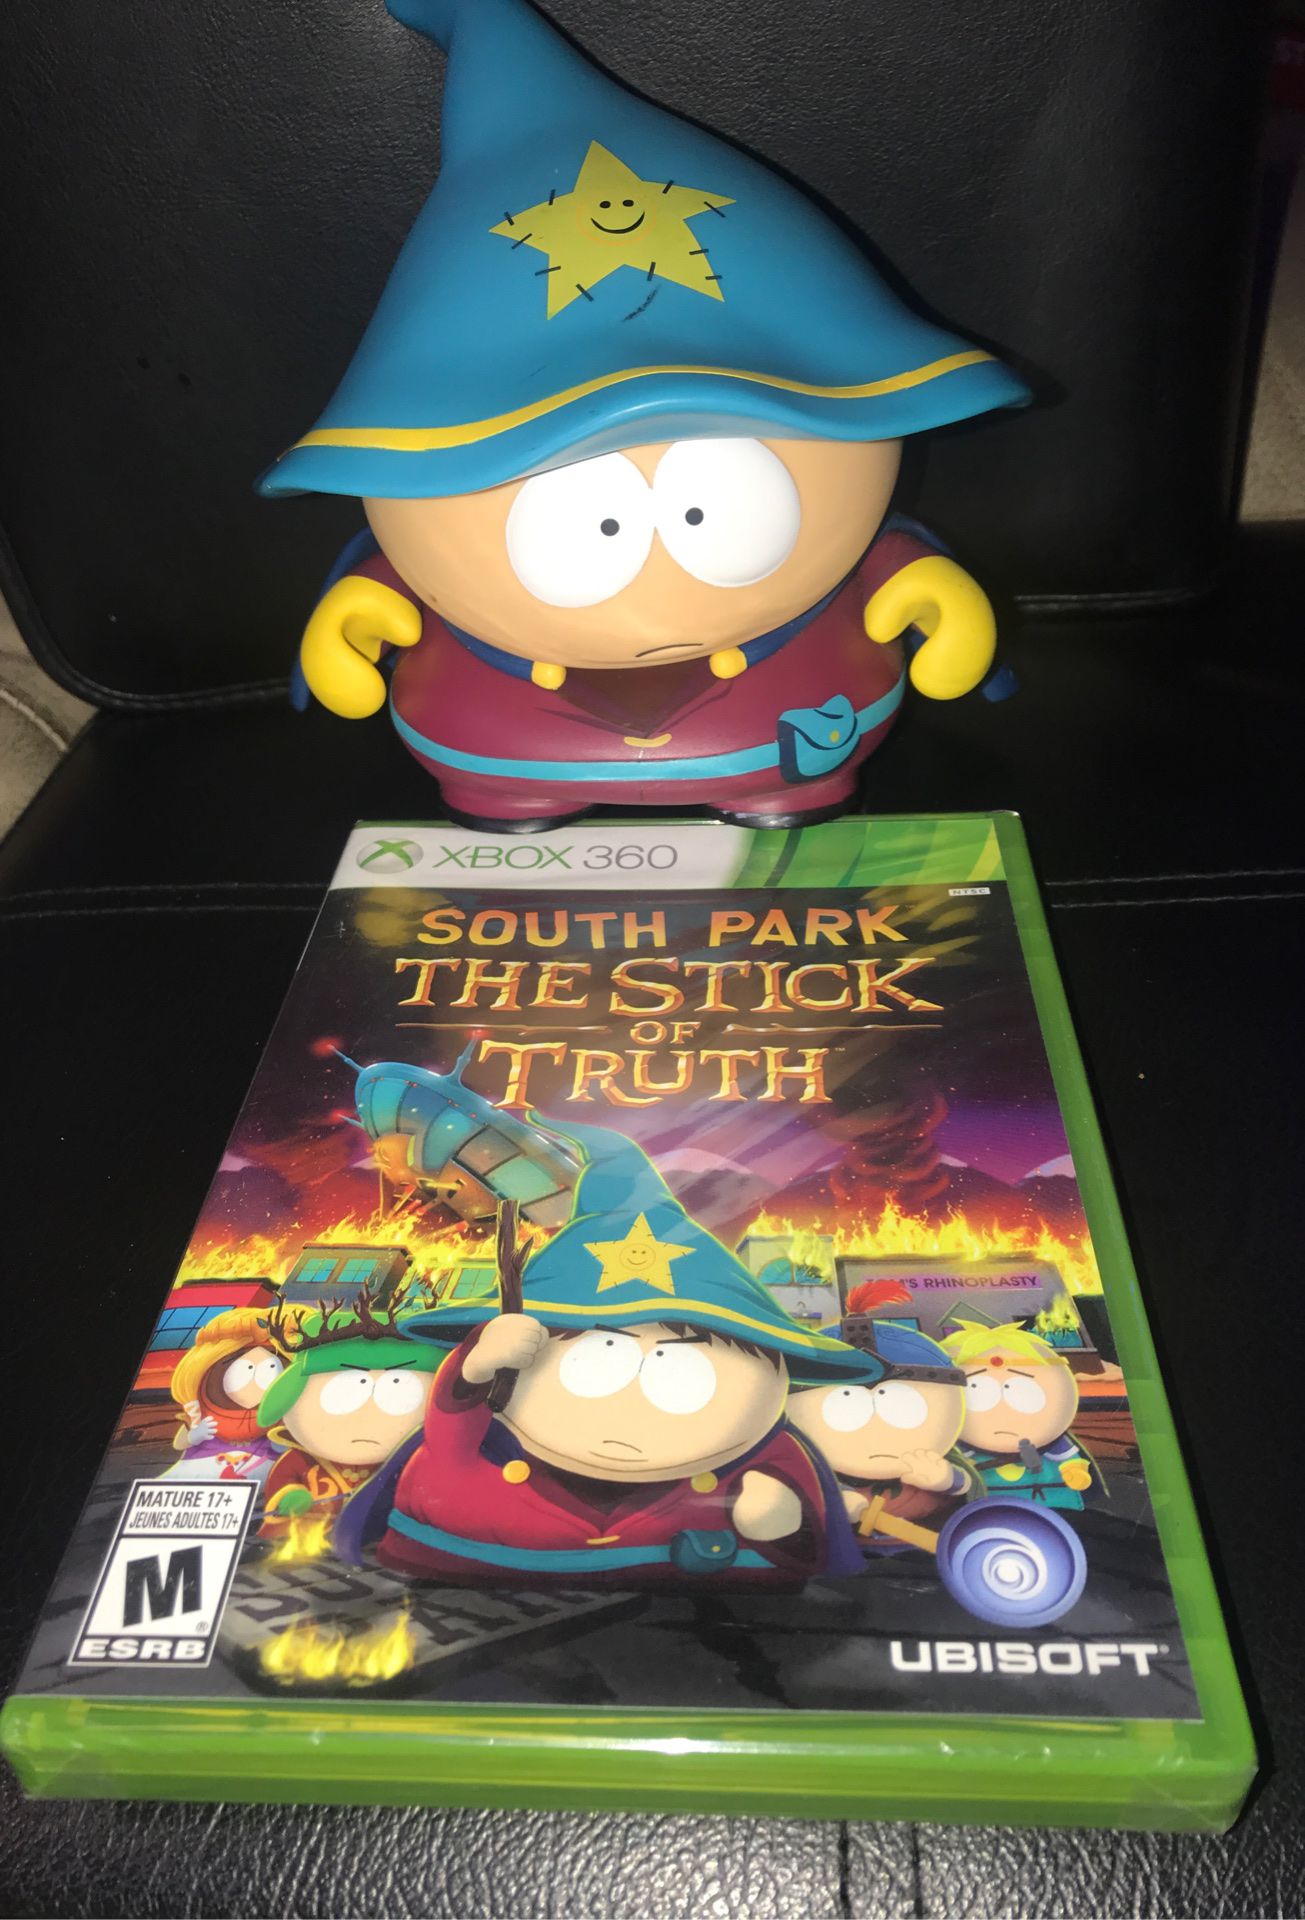 South Park The Stick Of Truth game & statue Xbox 360